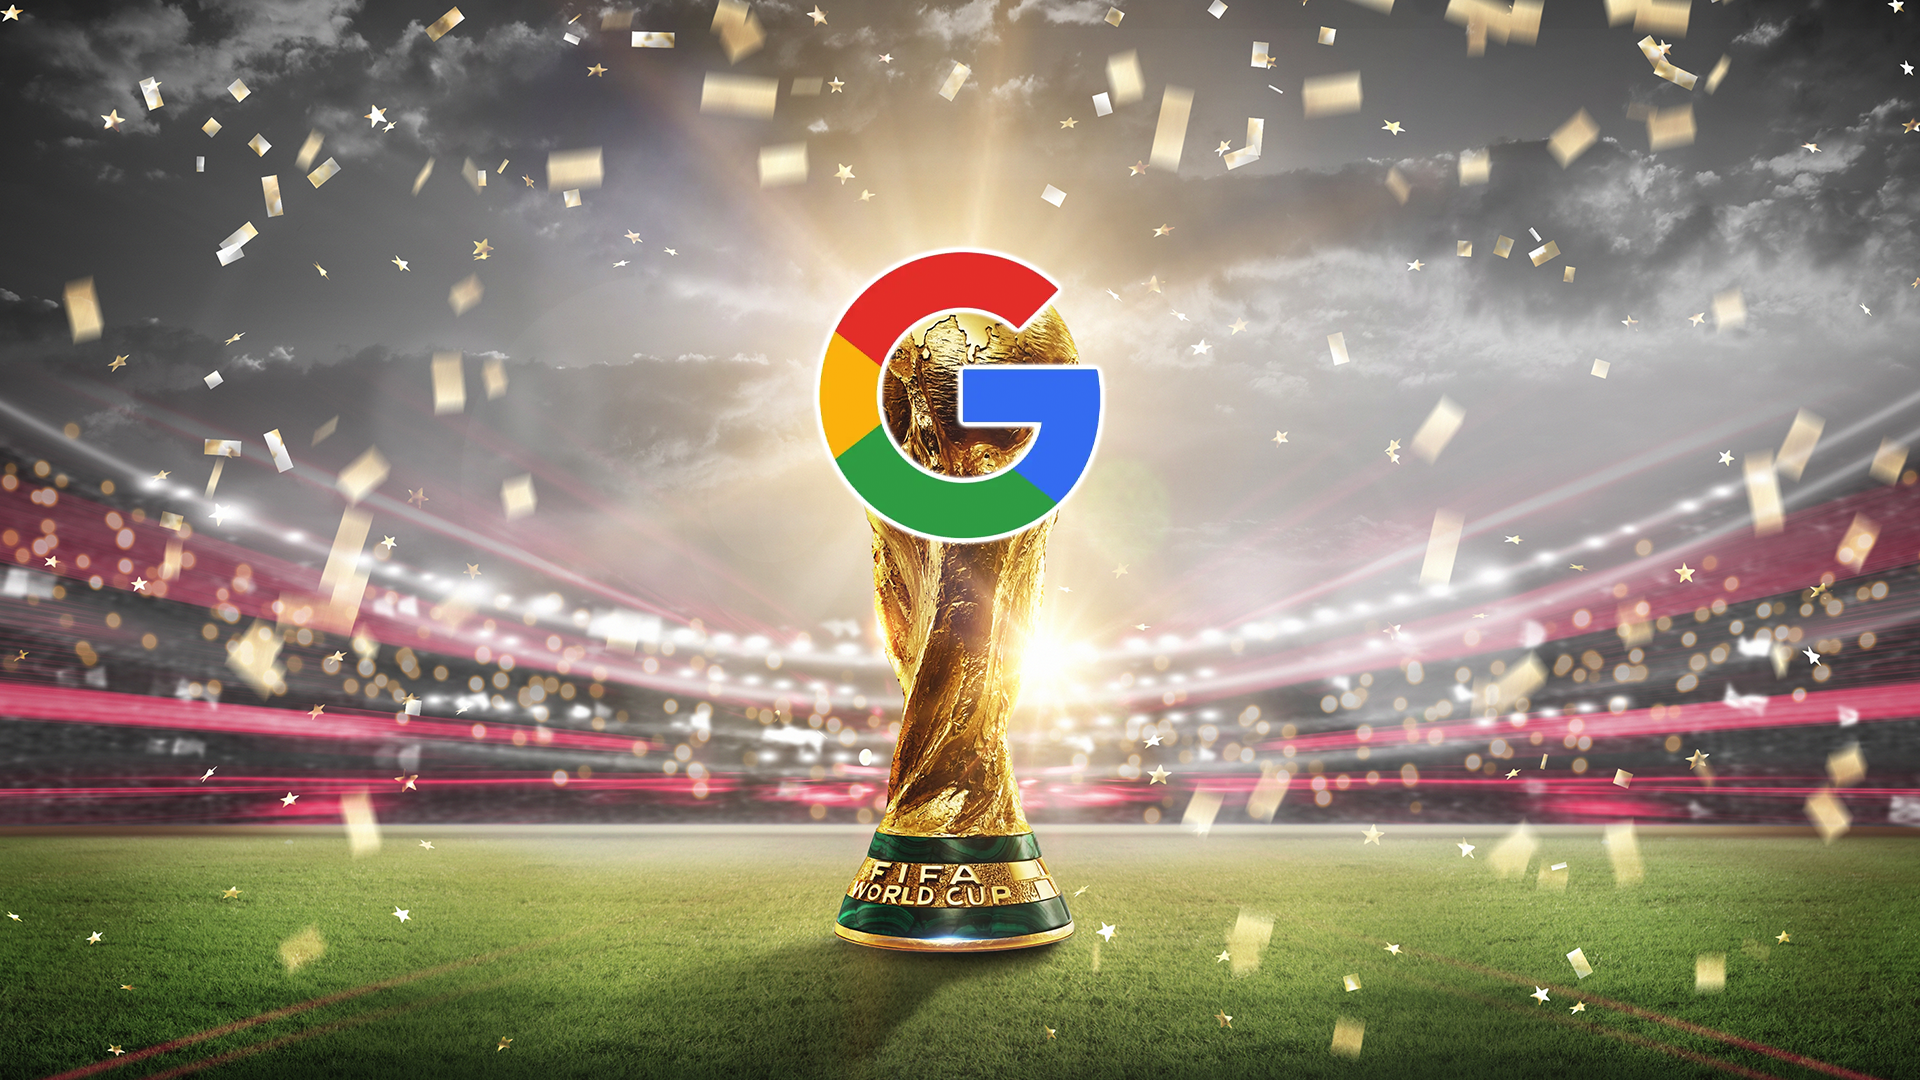 Google Is Aiming to Be the Ultimate World Cup Companion